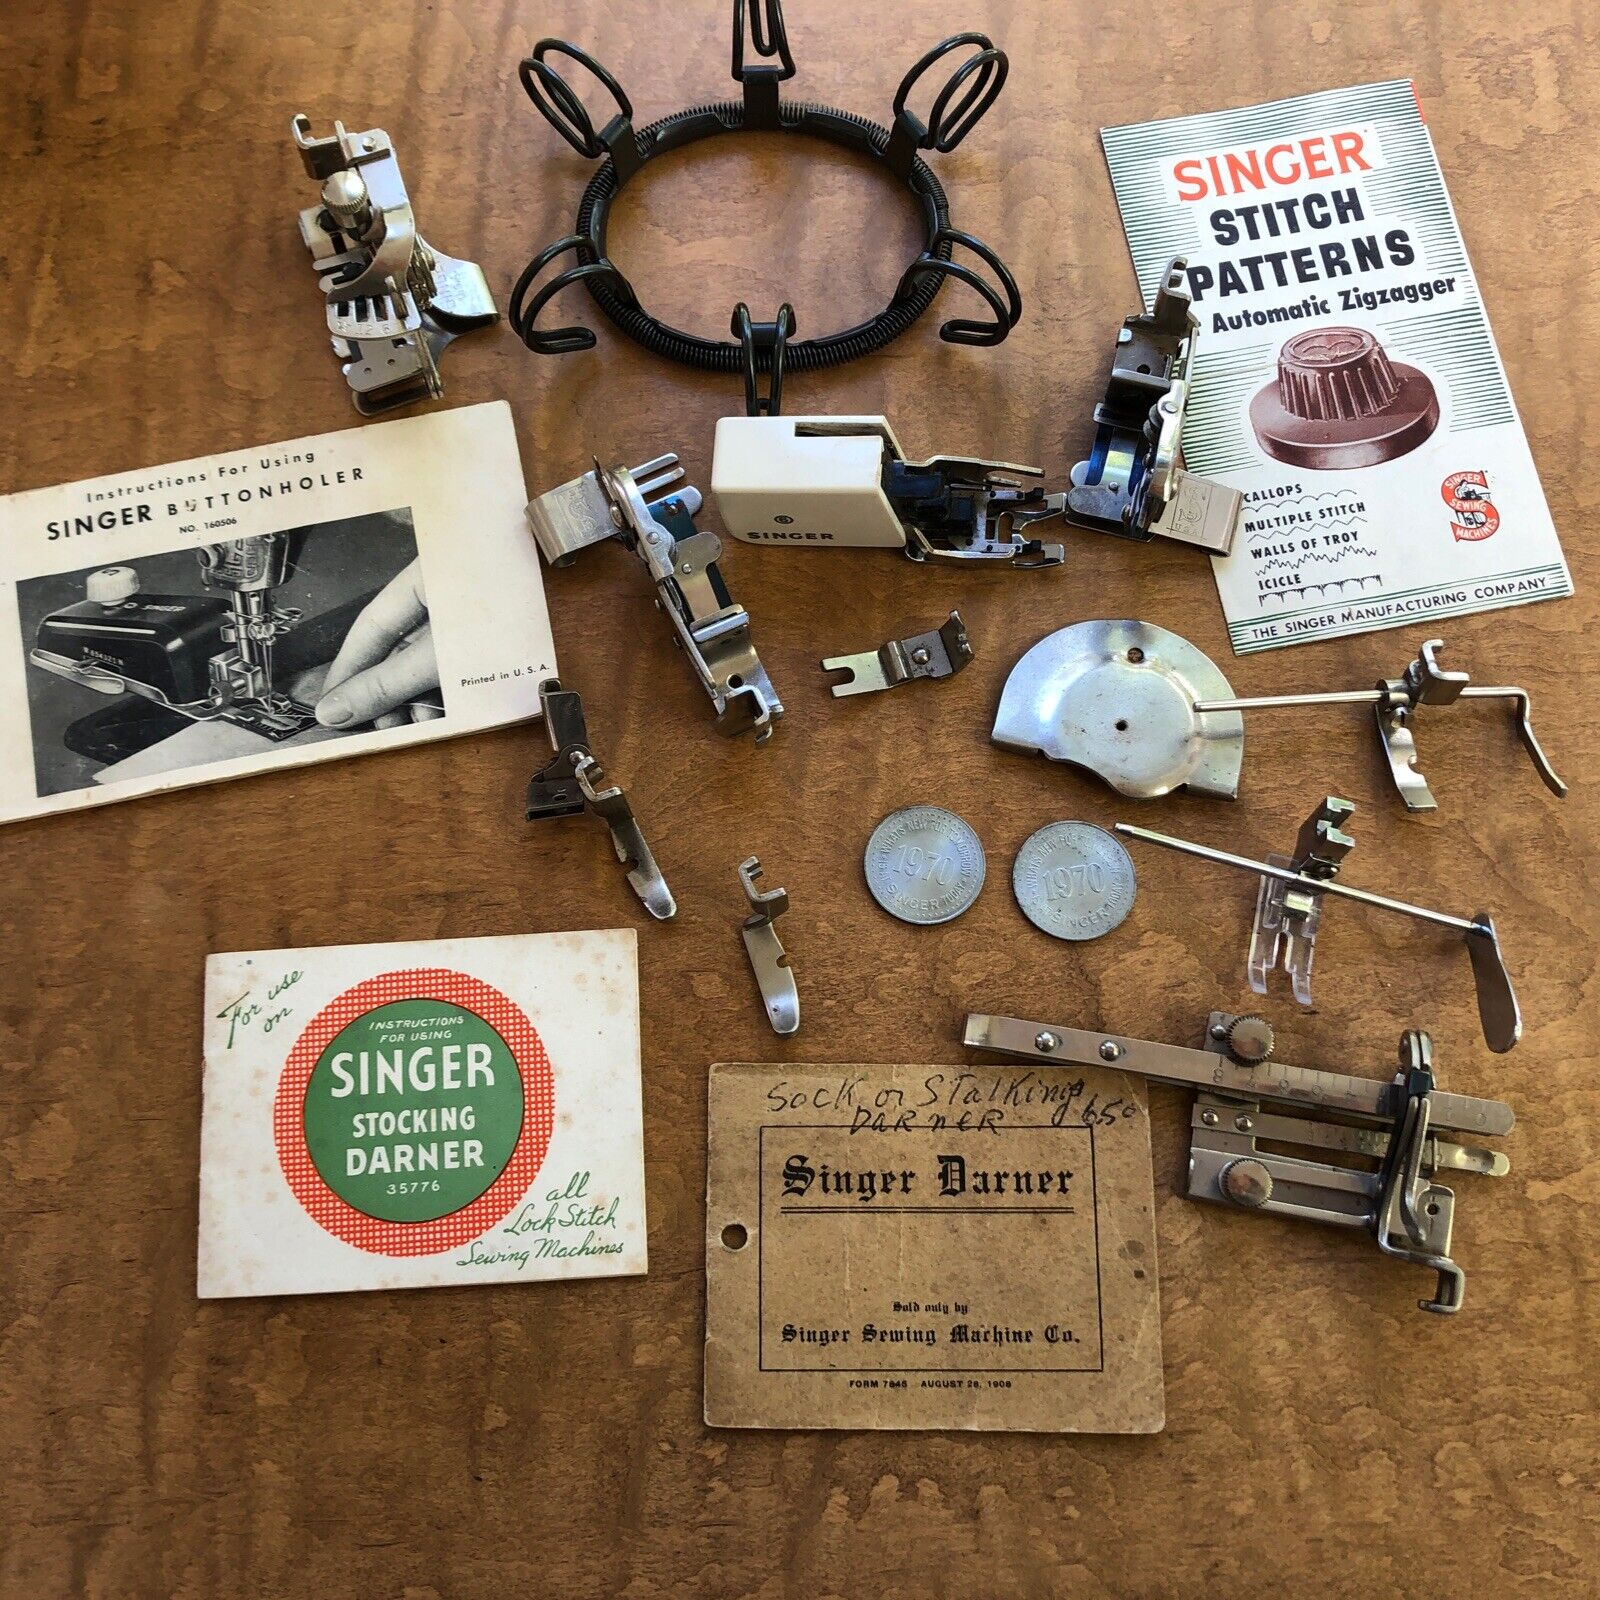 Lot Vintage Singer Sewing Machine & Other Sewing Items Darner Manual Attachments